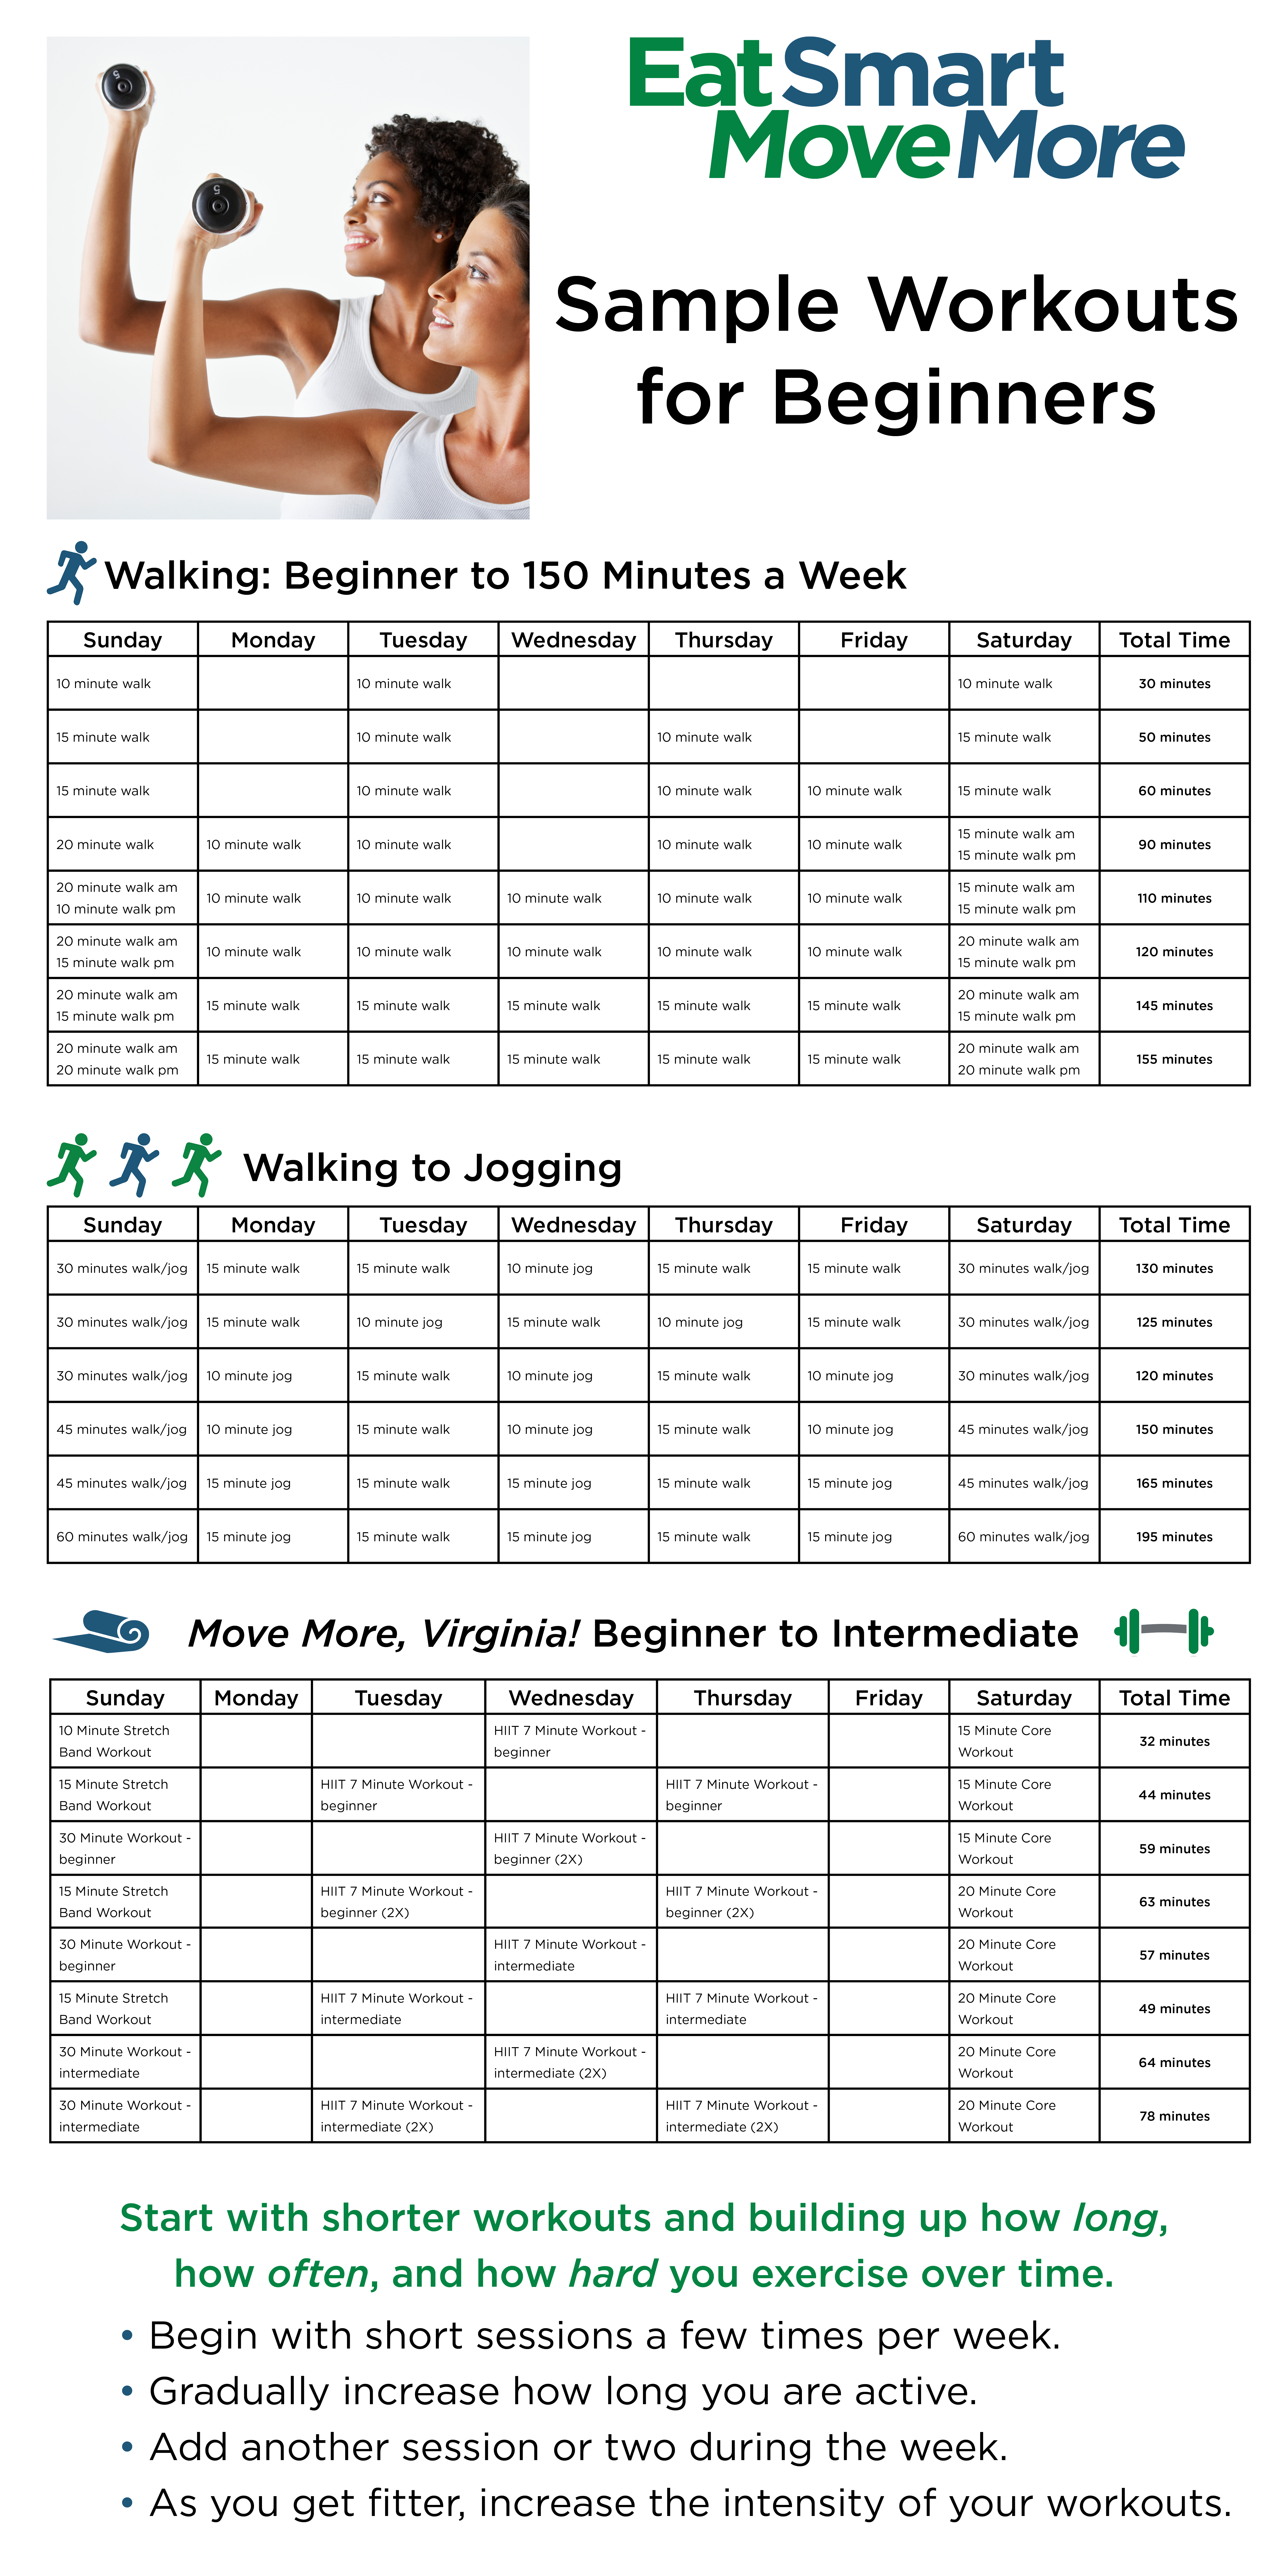 Workouts for Beginners | Virginia Family Nutrition Program